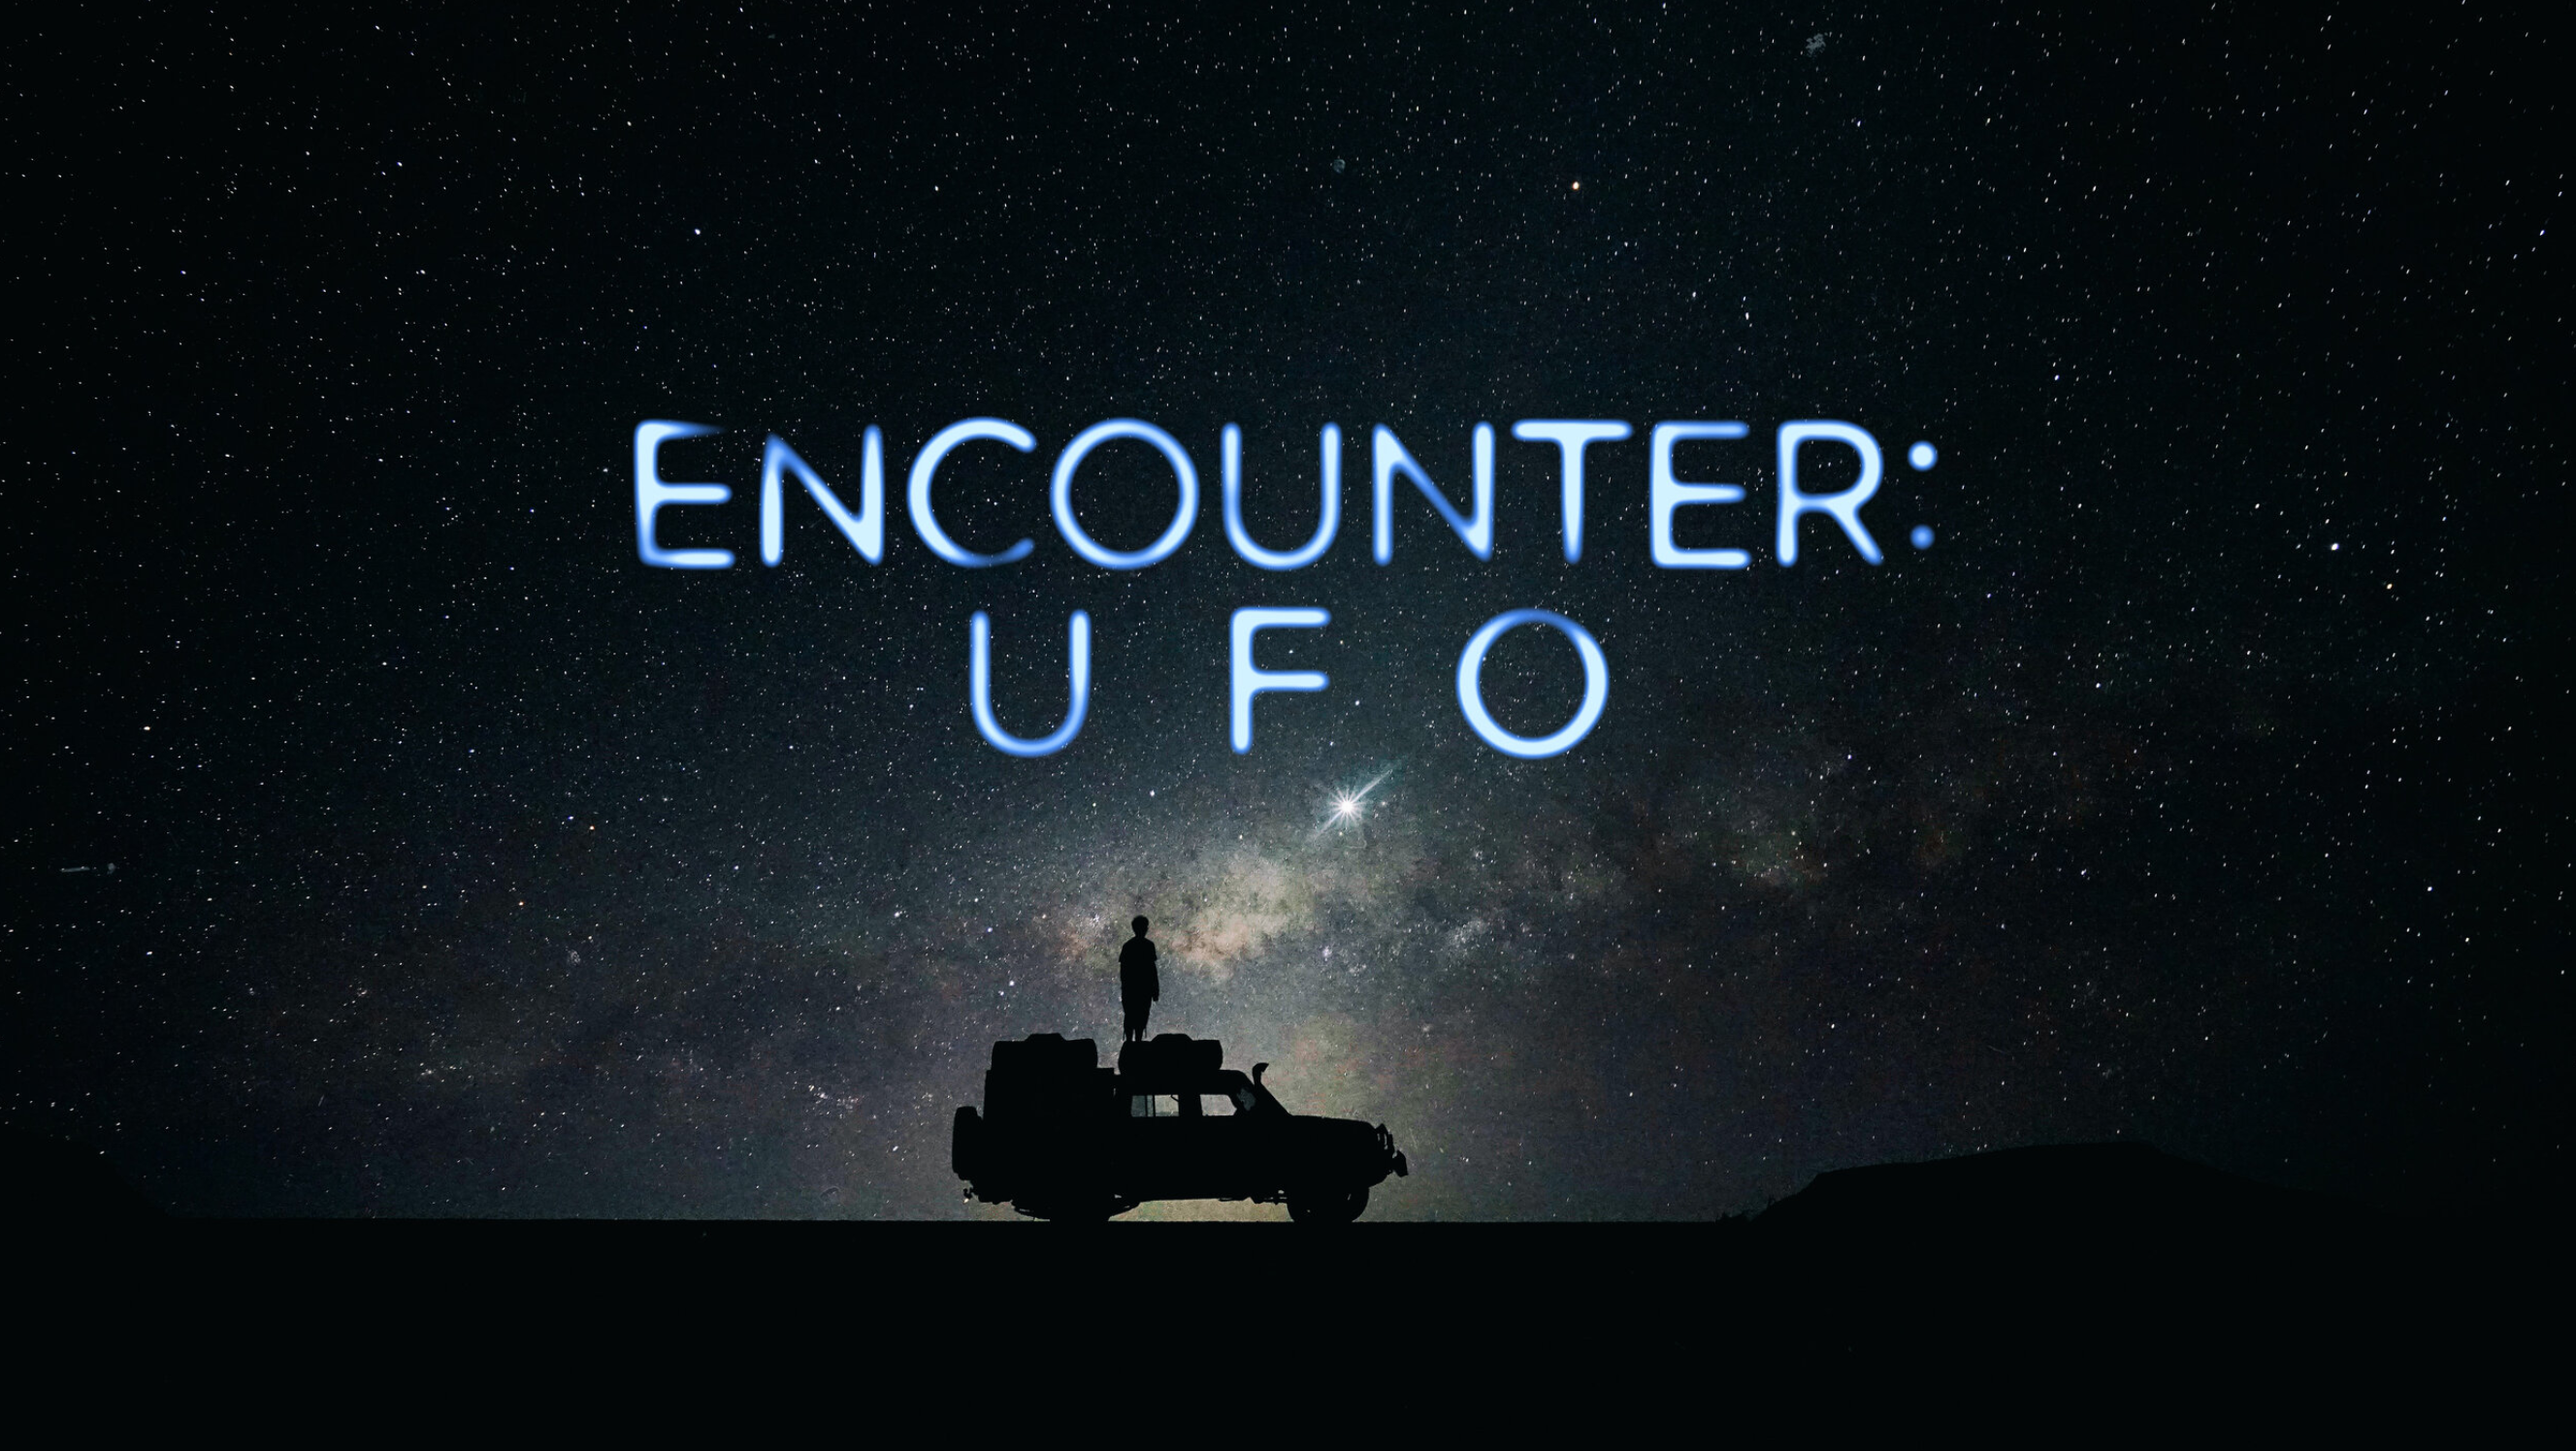 Encounter UFO on T+E - a picture of a dune buggy with the backdrop of an infinite night sky